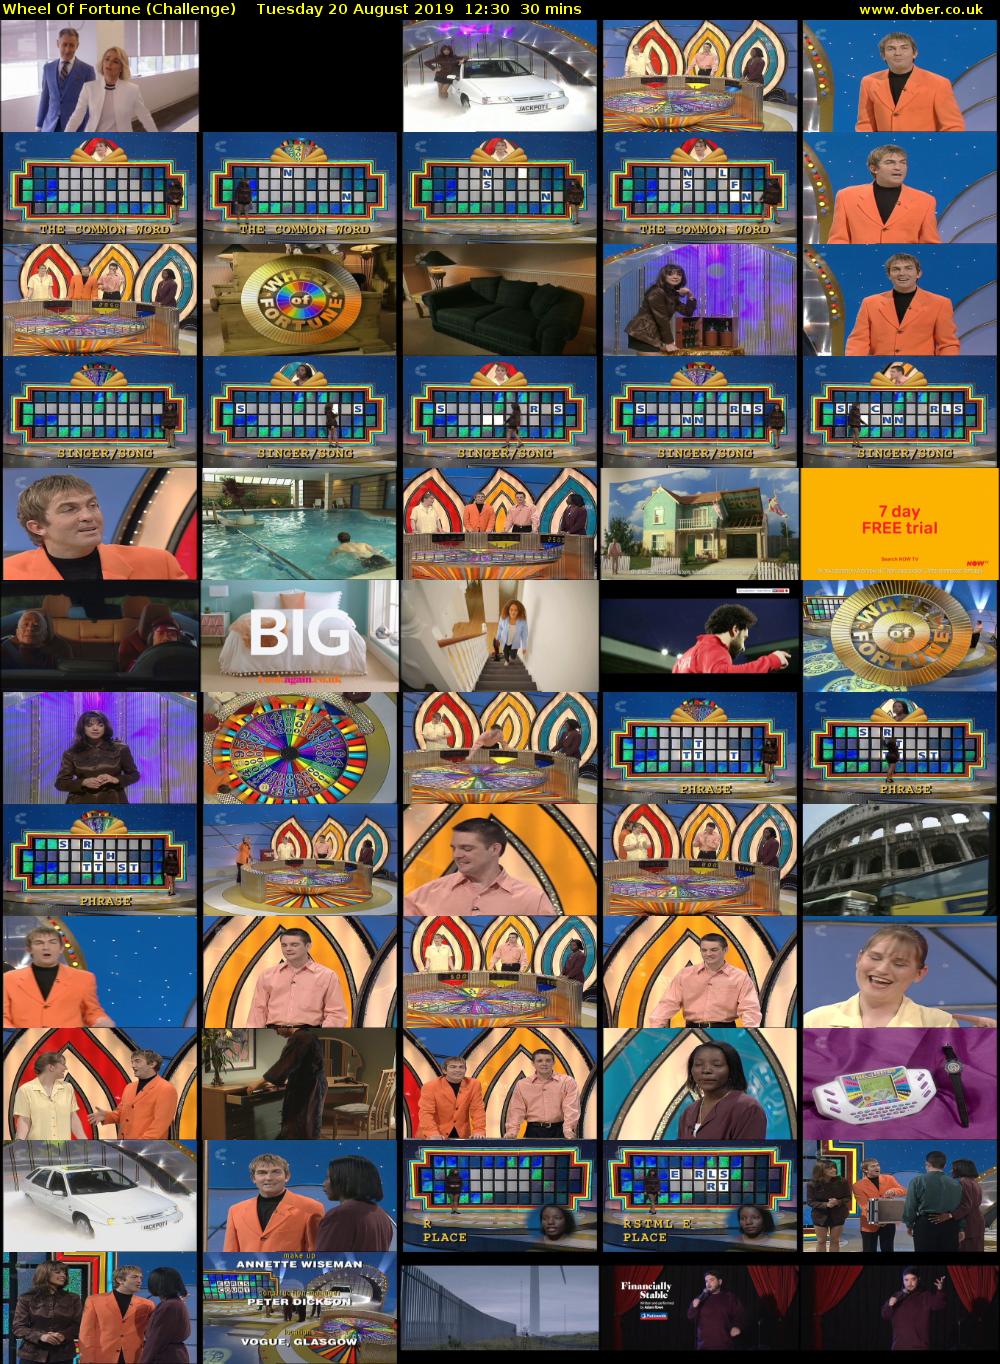 Wheel Of Fortune (Challenge) Tuesday 20 August 2019 12:30 - 13:00